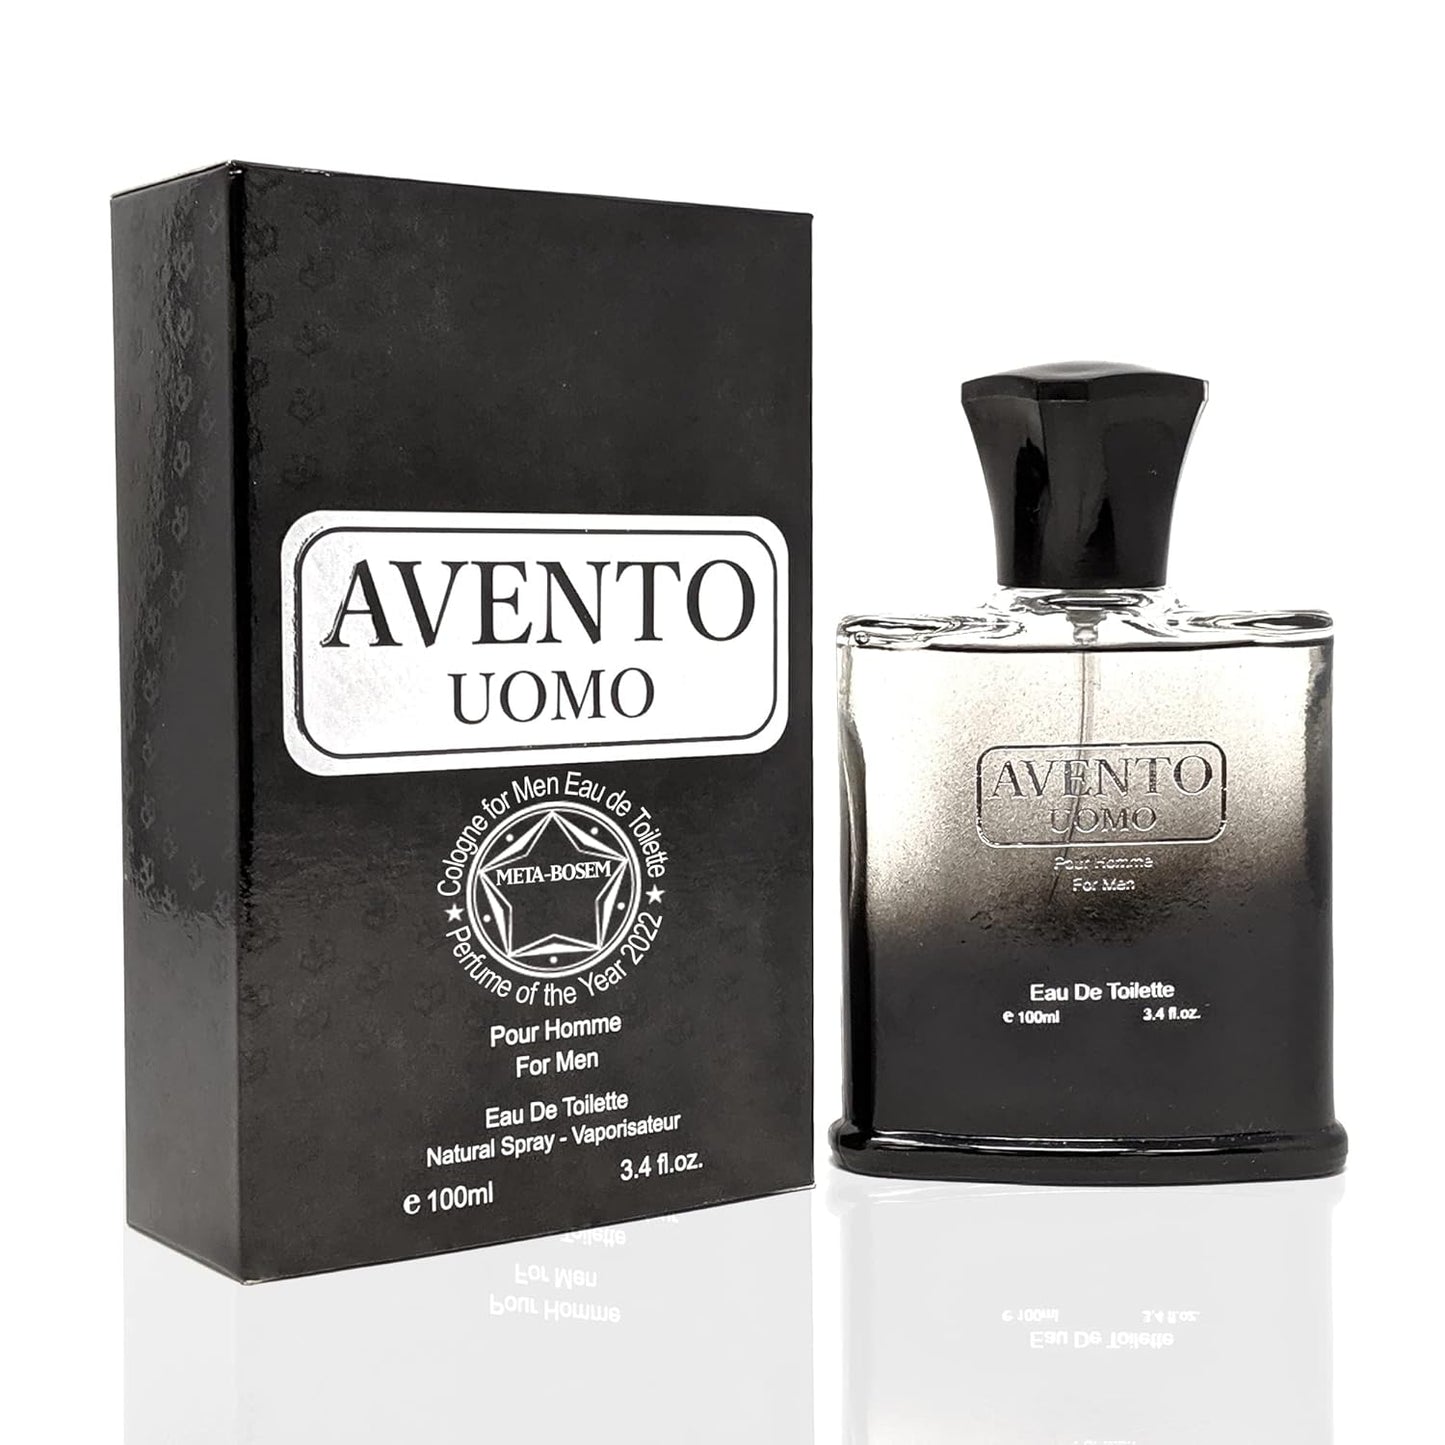 META-BOSEM Avento Uomo, Men's Cologne Eau de Toilette Natural Spray - Masculine Aroma Notes - Fresh Scent - Great Holiday Gift - for All Day Use - a Classic Bottle, 3.4 Fluid Ounce/100Ml